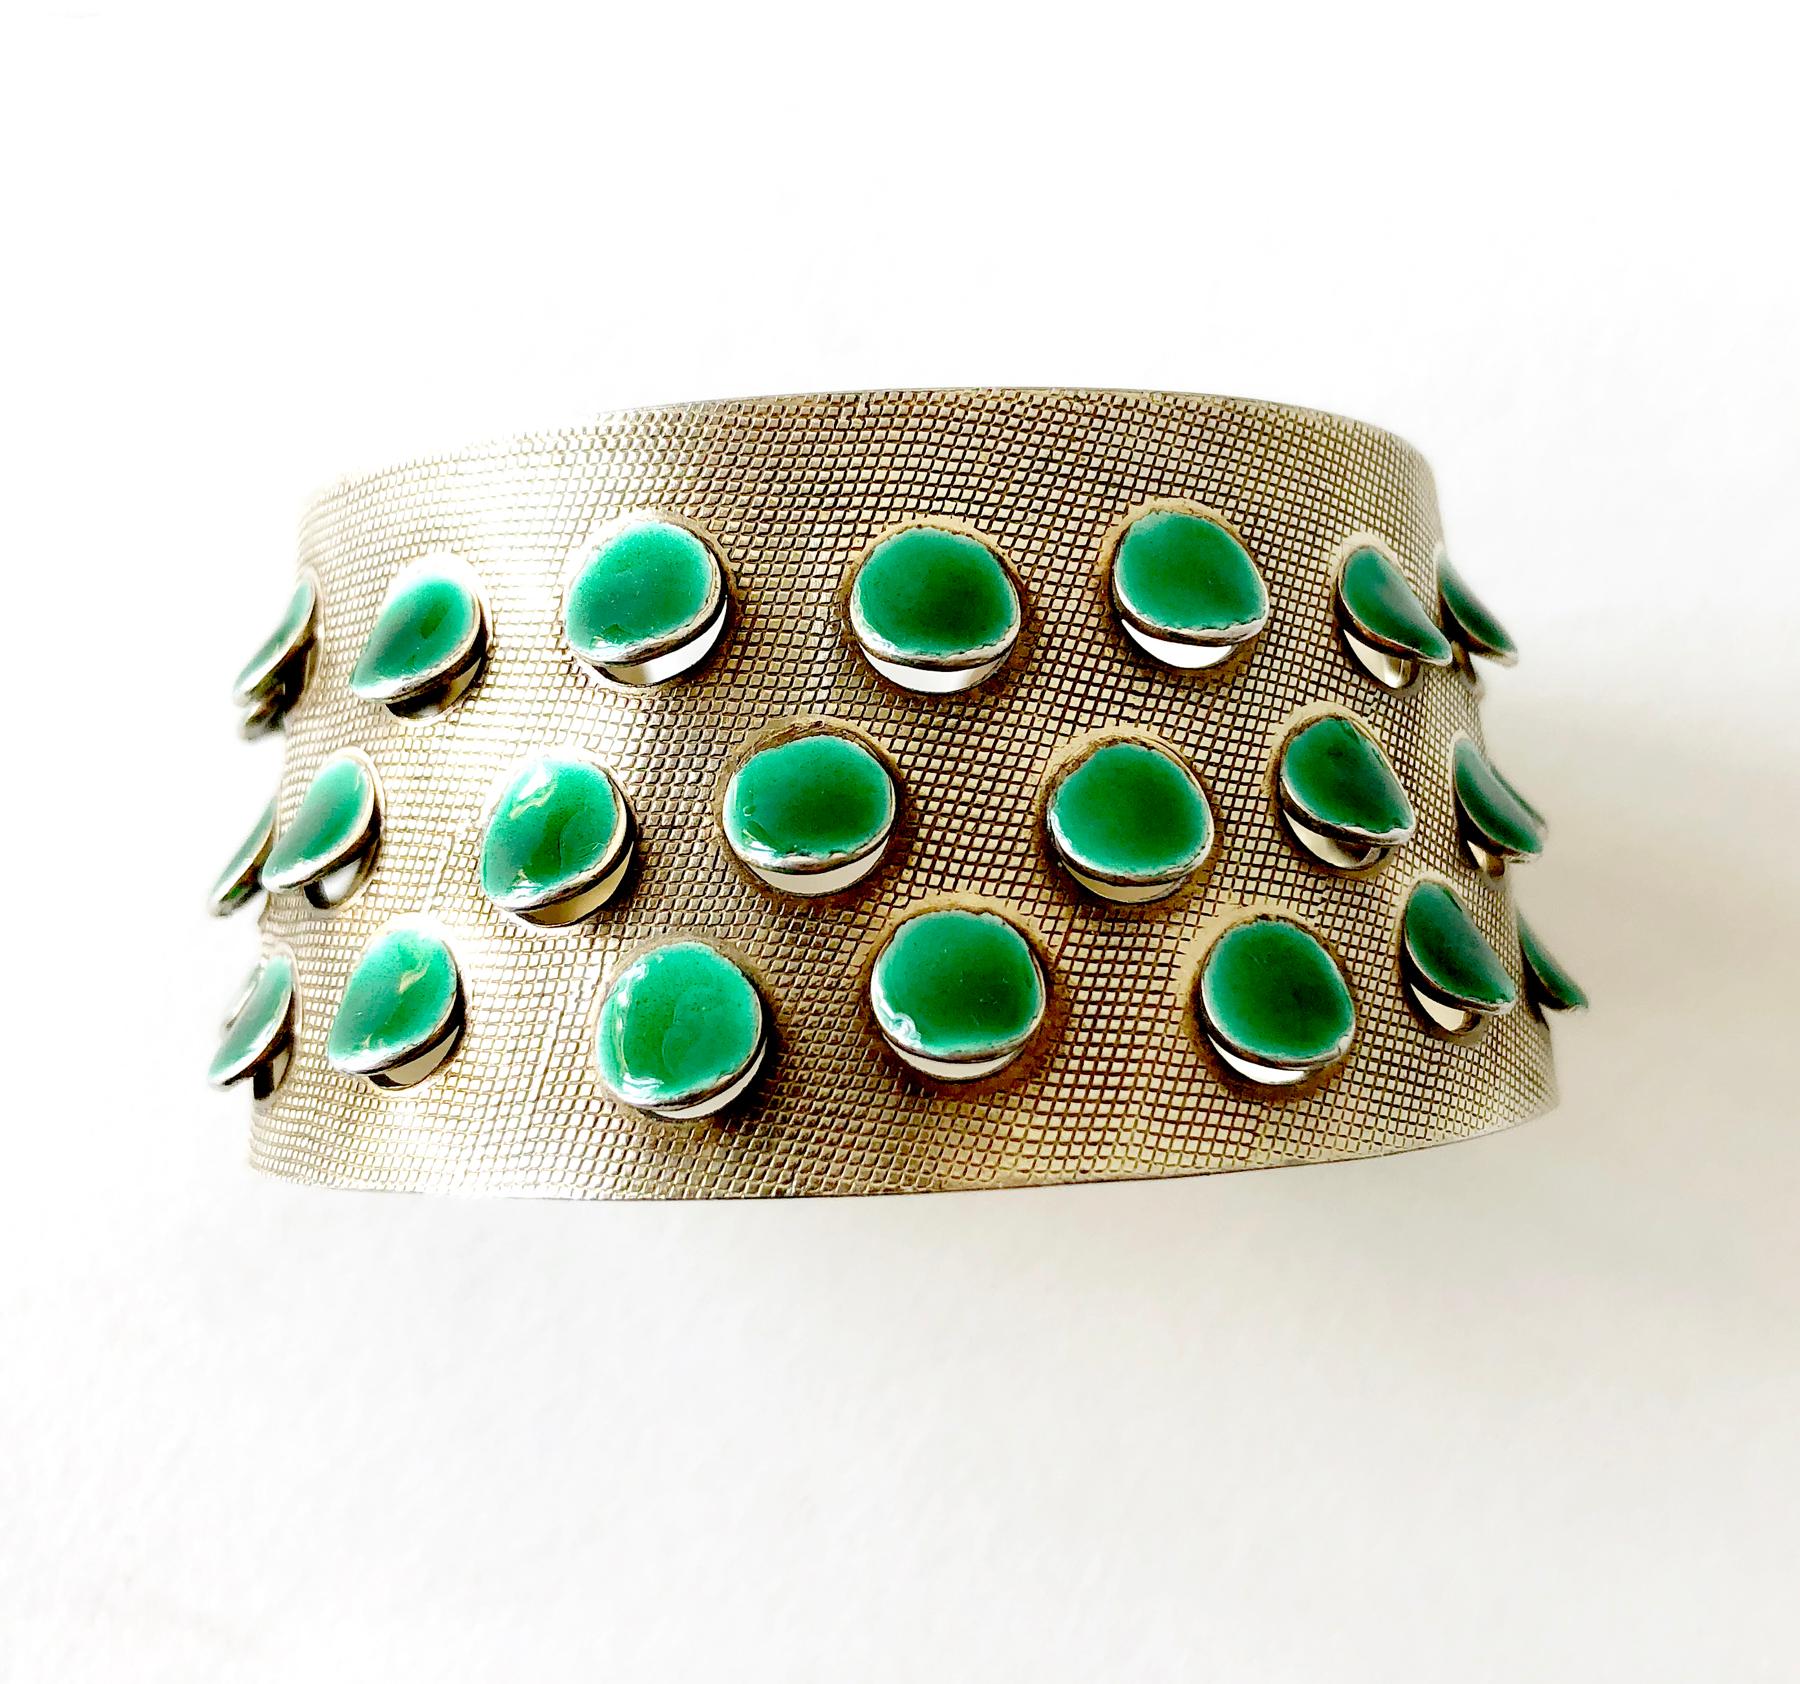 Iconic, lightly gold plated sterling silver bracelet with emerald green enameled scales or tabs created by Grete Prytz Kittelsen of Oslo, Norway.  Bracelet measures 1 3/8